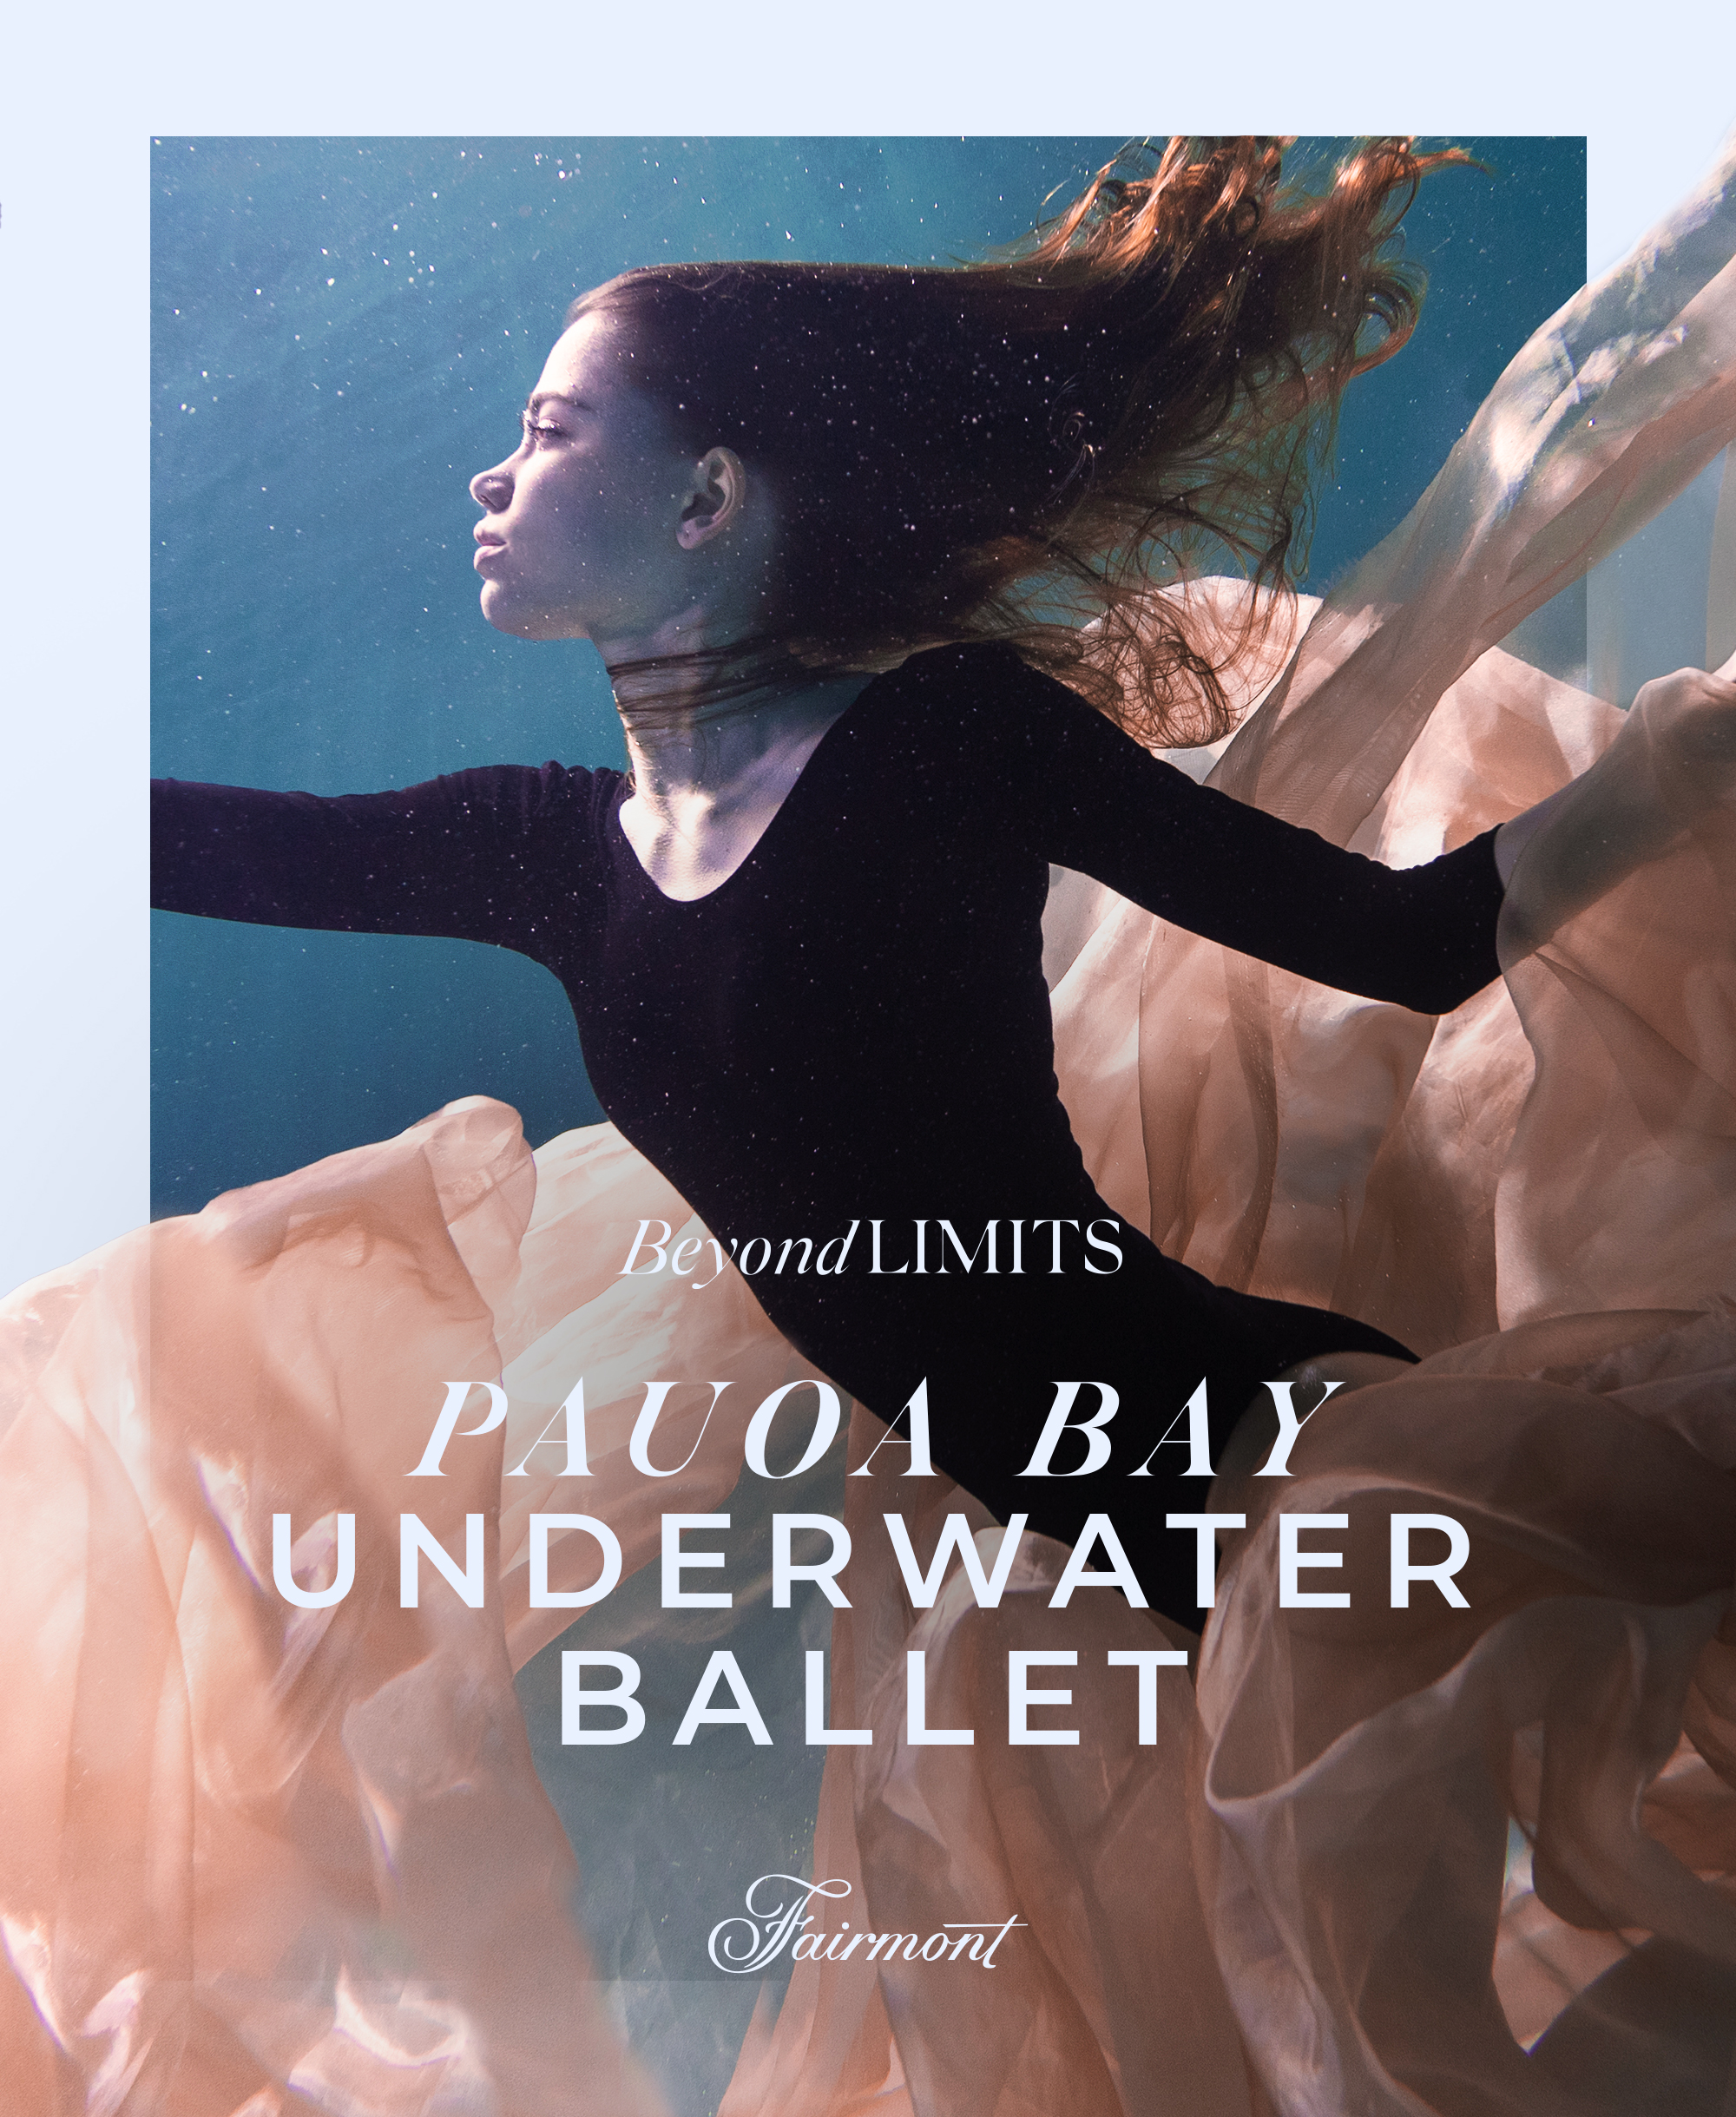 Fairmont Orchid puts on exhilarating ballet under the sea